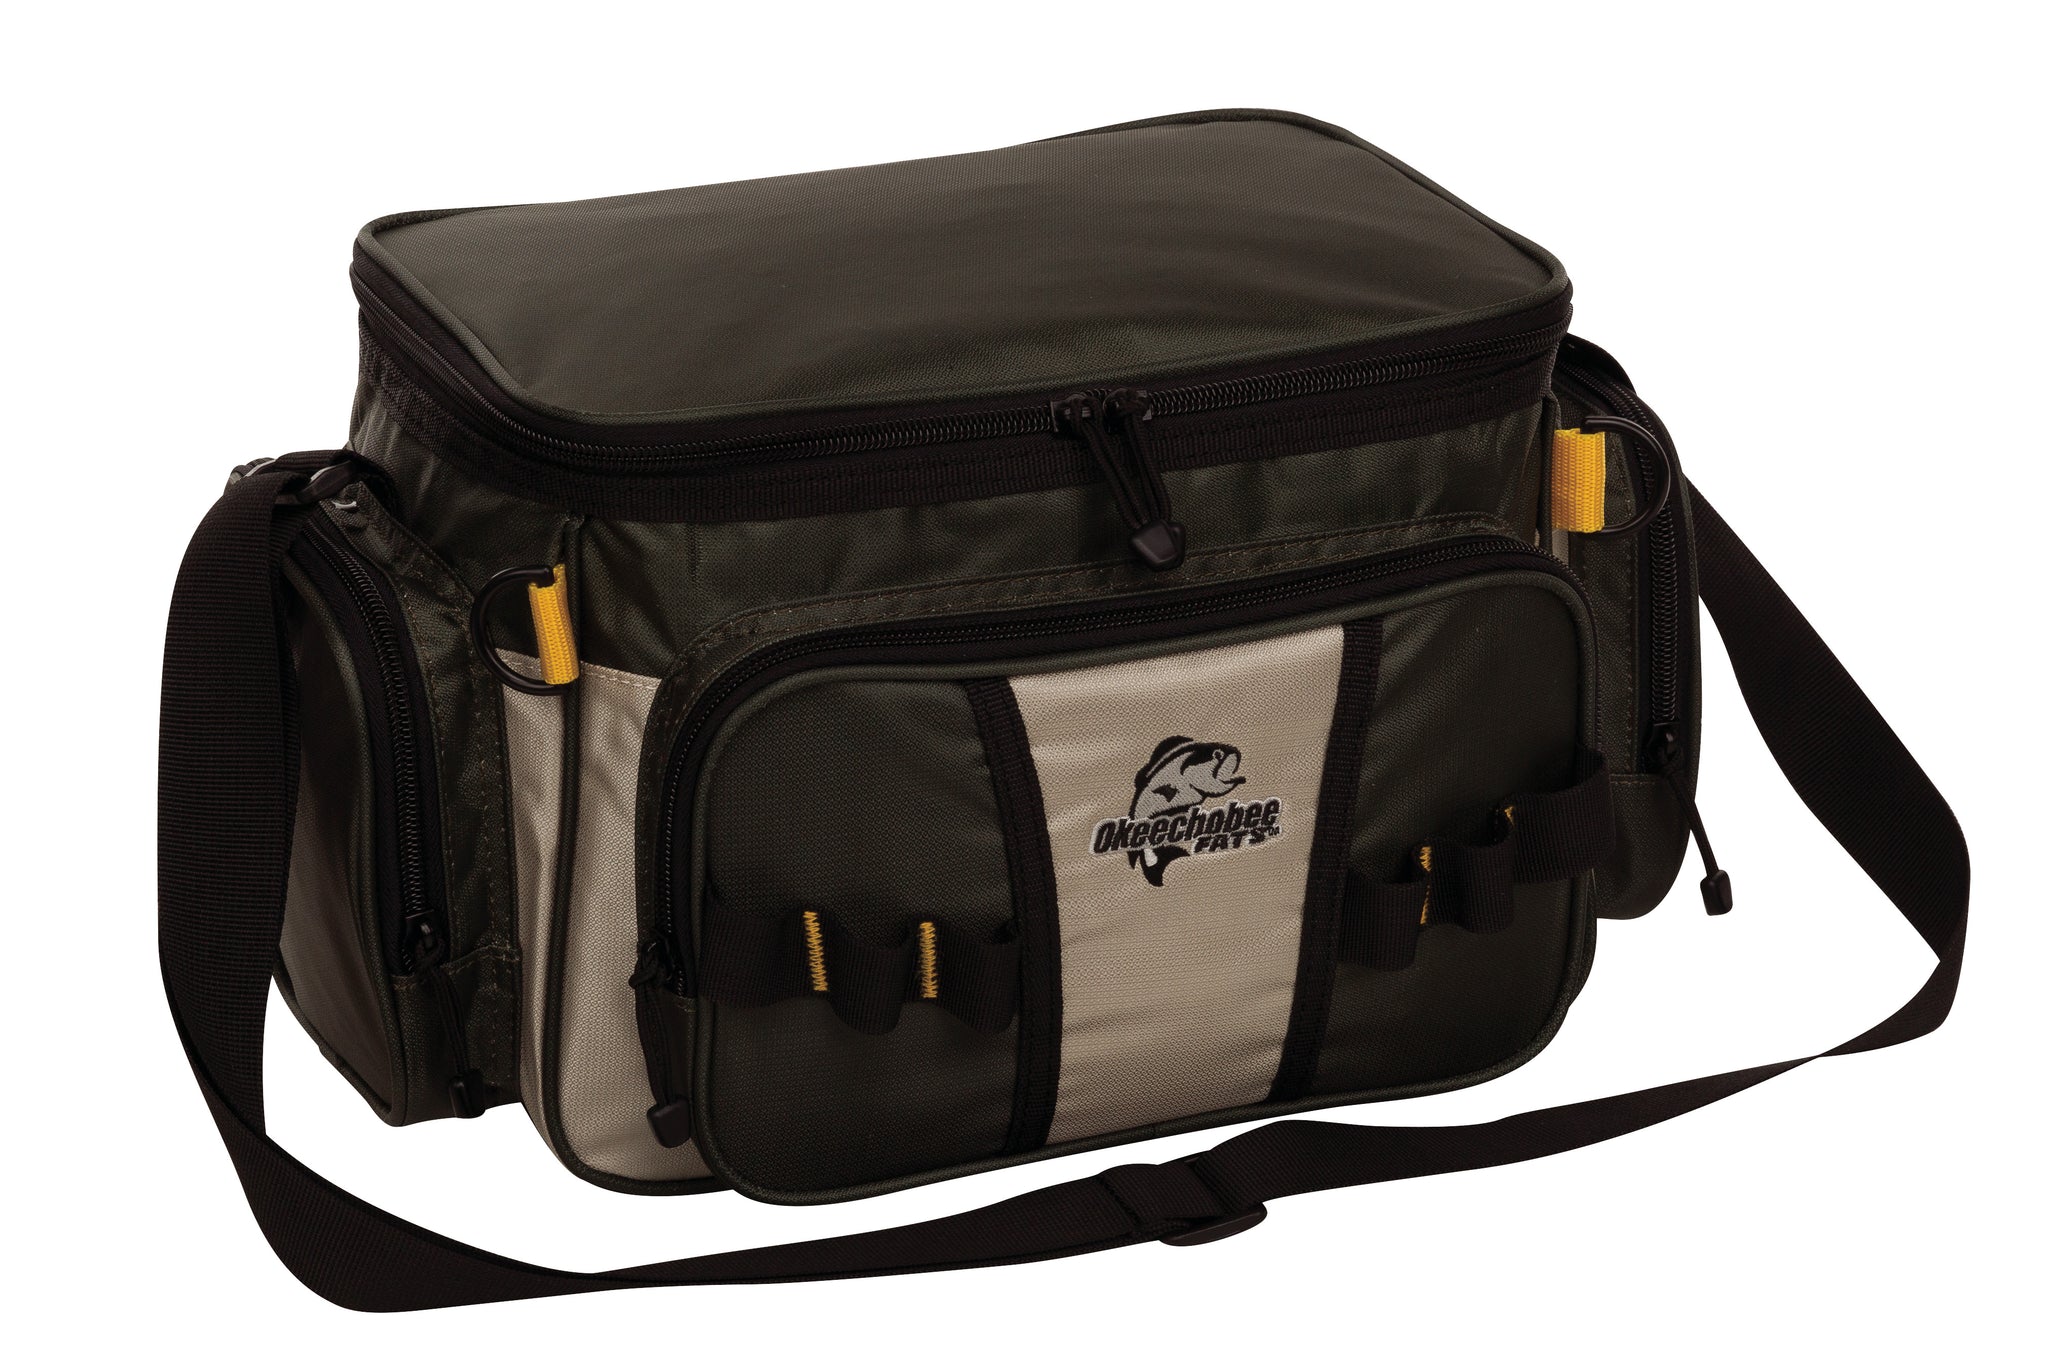 Safe Passage Carry It All by Orvis - FLY FISHING BAGS